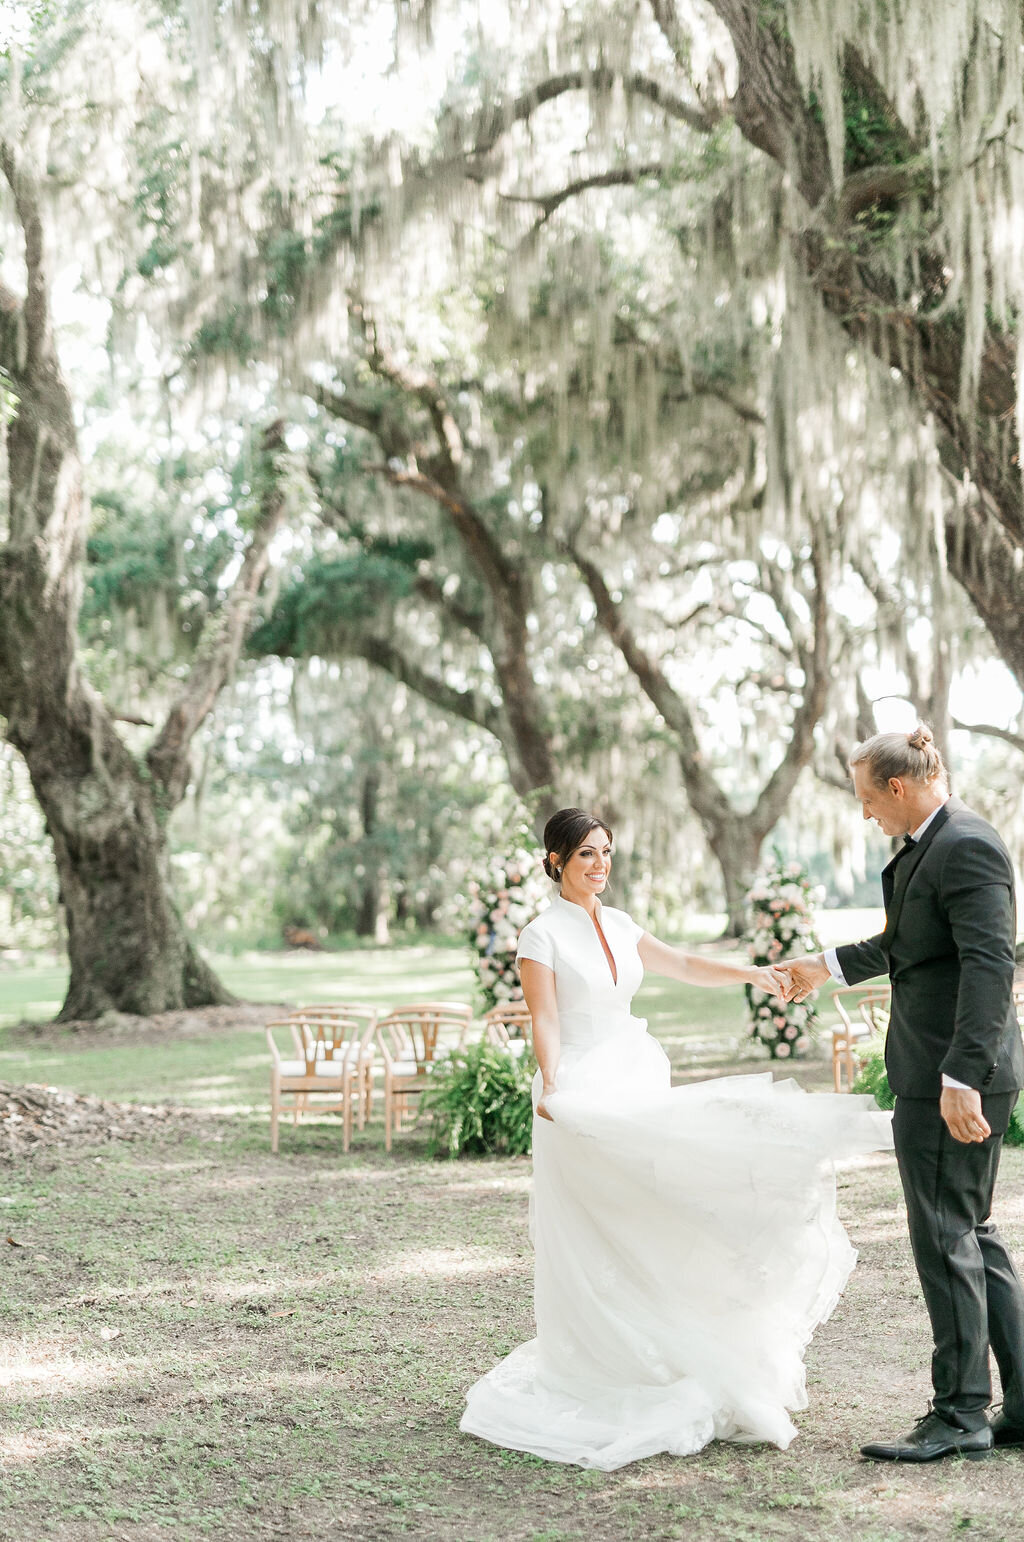 Beaufort South Carolina Wedding  | Cotton Hall Events Wedding  | Trish Beck Events | HIlton Head Wedding Planner | Southeast Wedding Planner |  Wedding Ceremony under the Oaks with the Spanish Moss